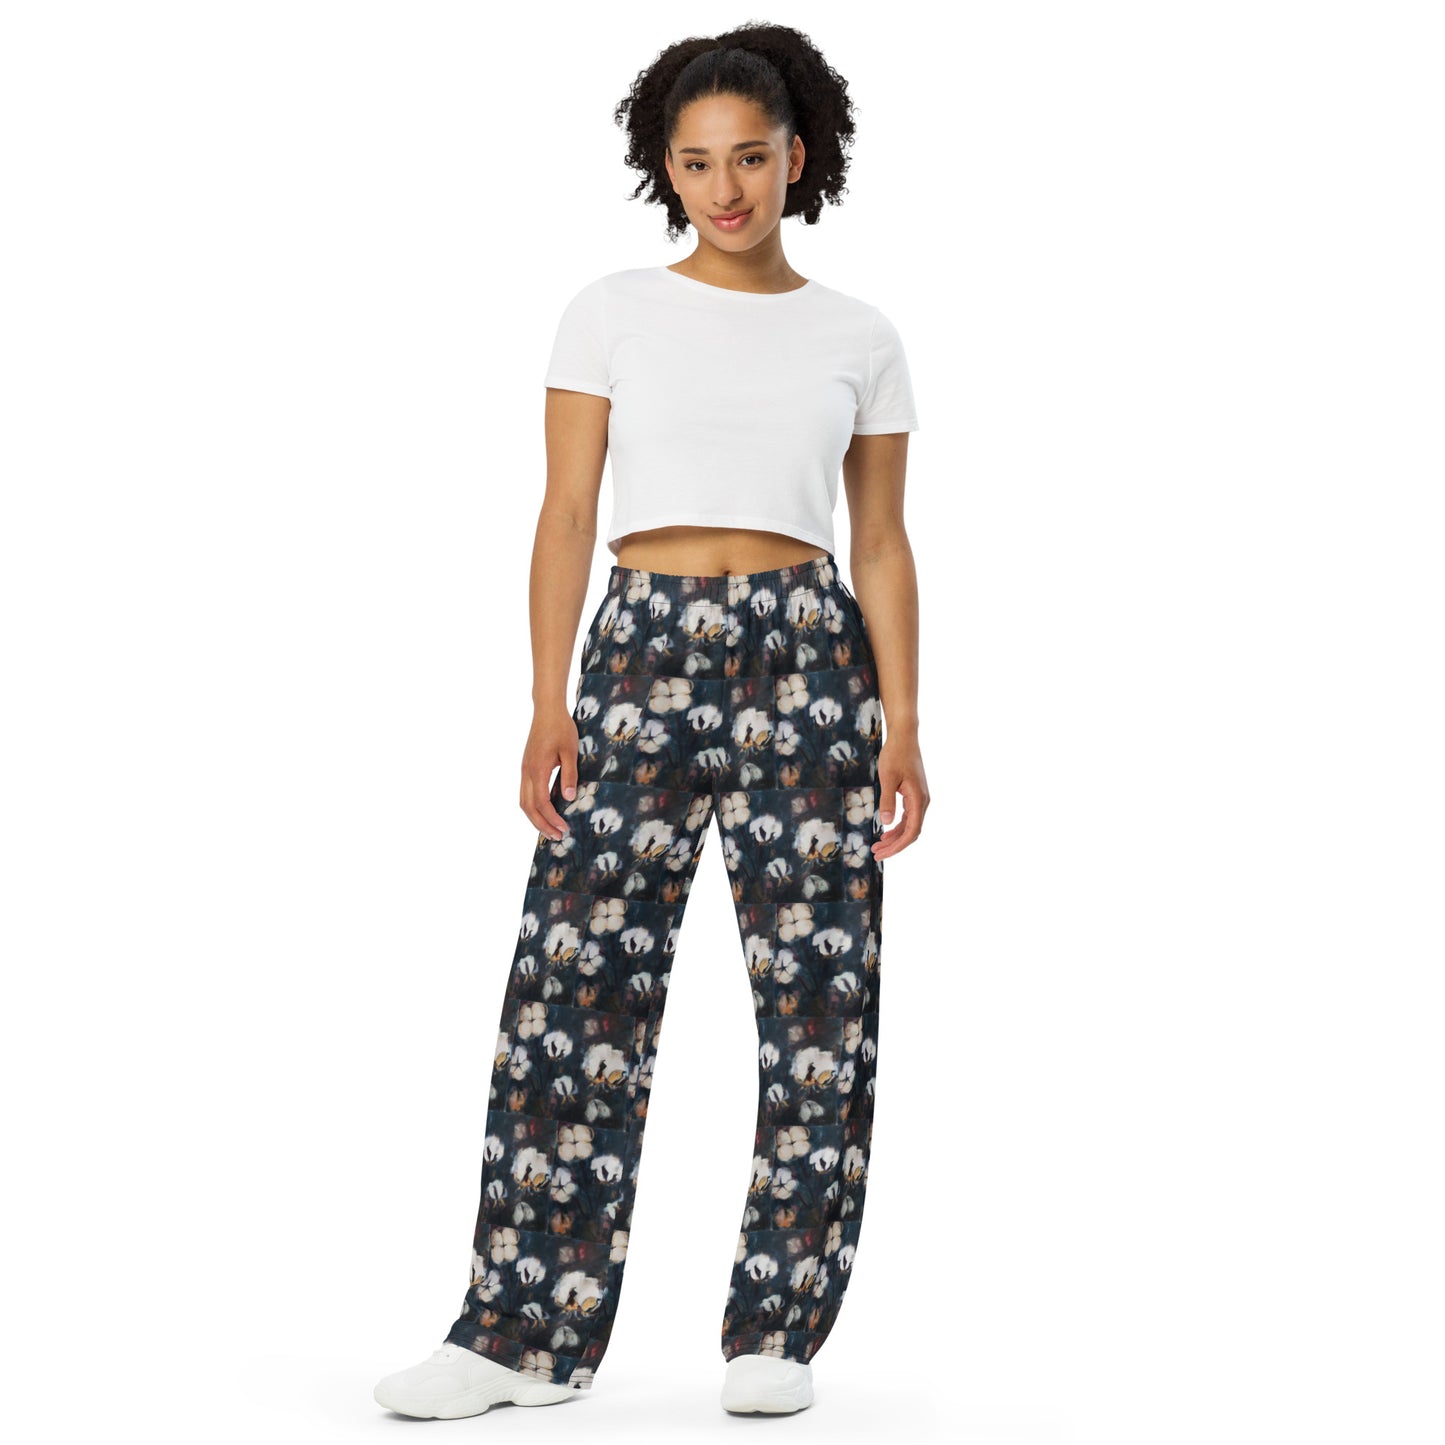 Cotton at Night All-over print unisex wide-leg pants